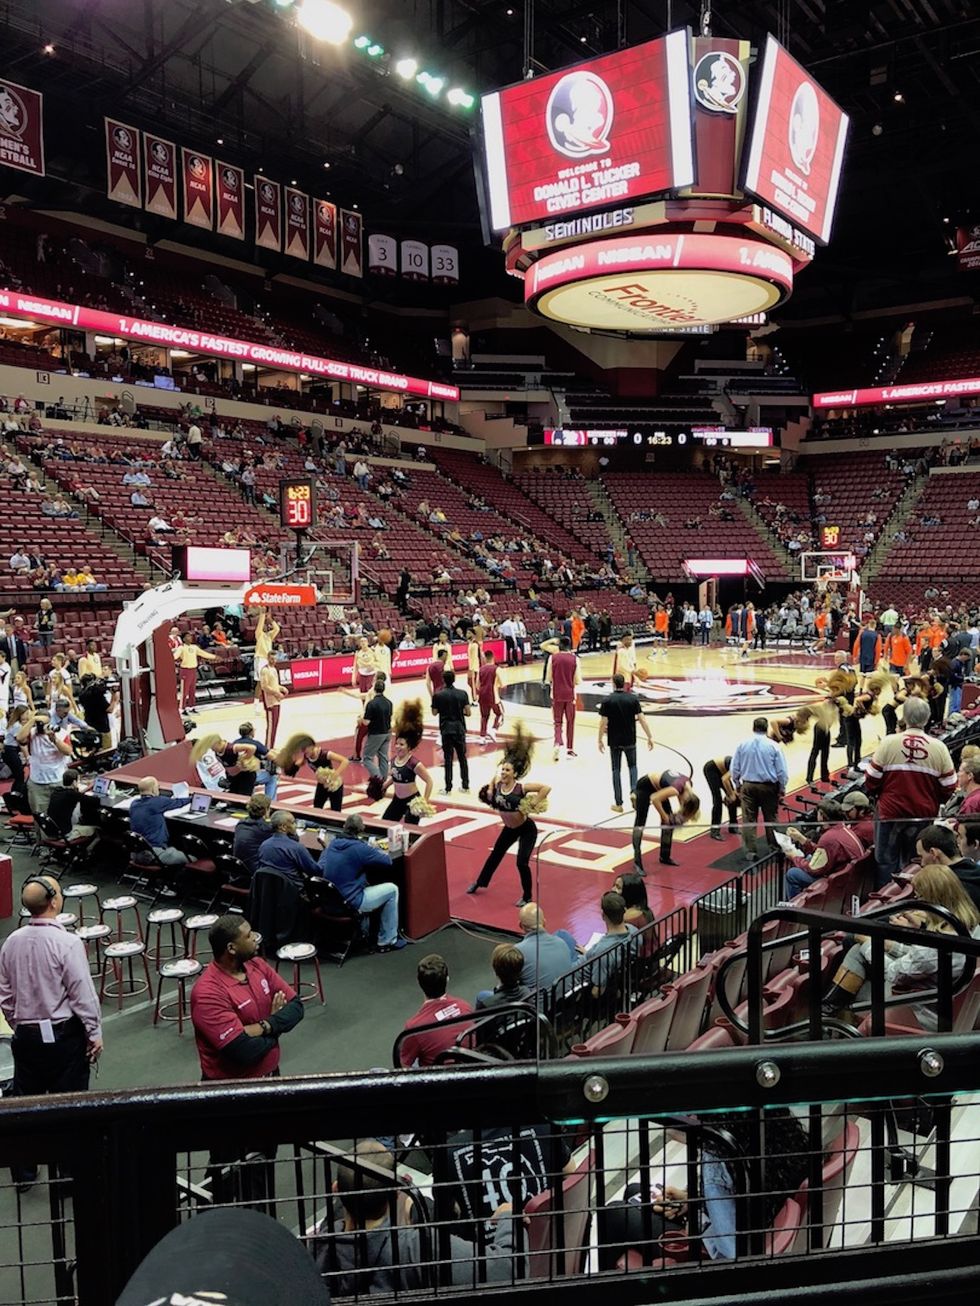 7 Reasons Everyone Should Attend A Basketball Game